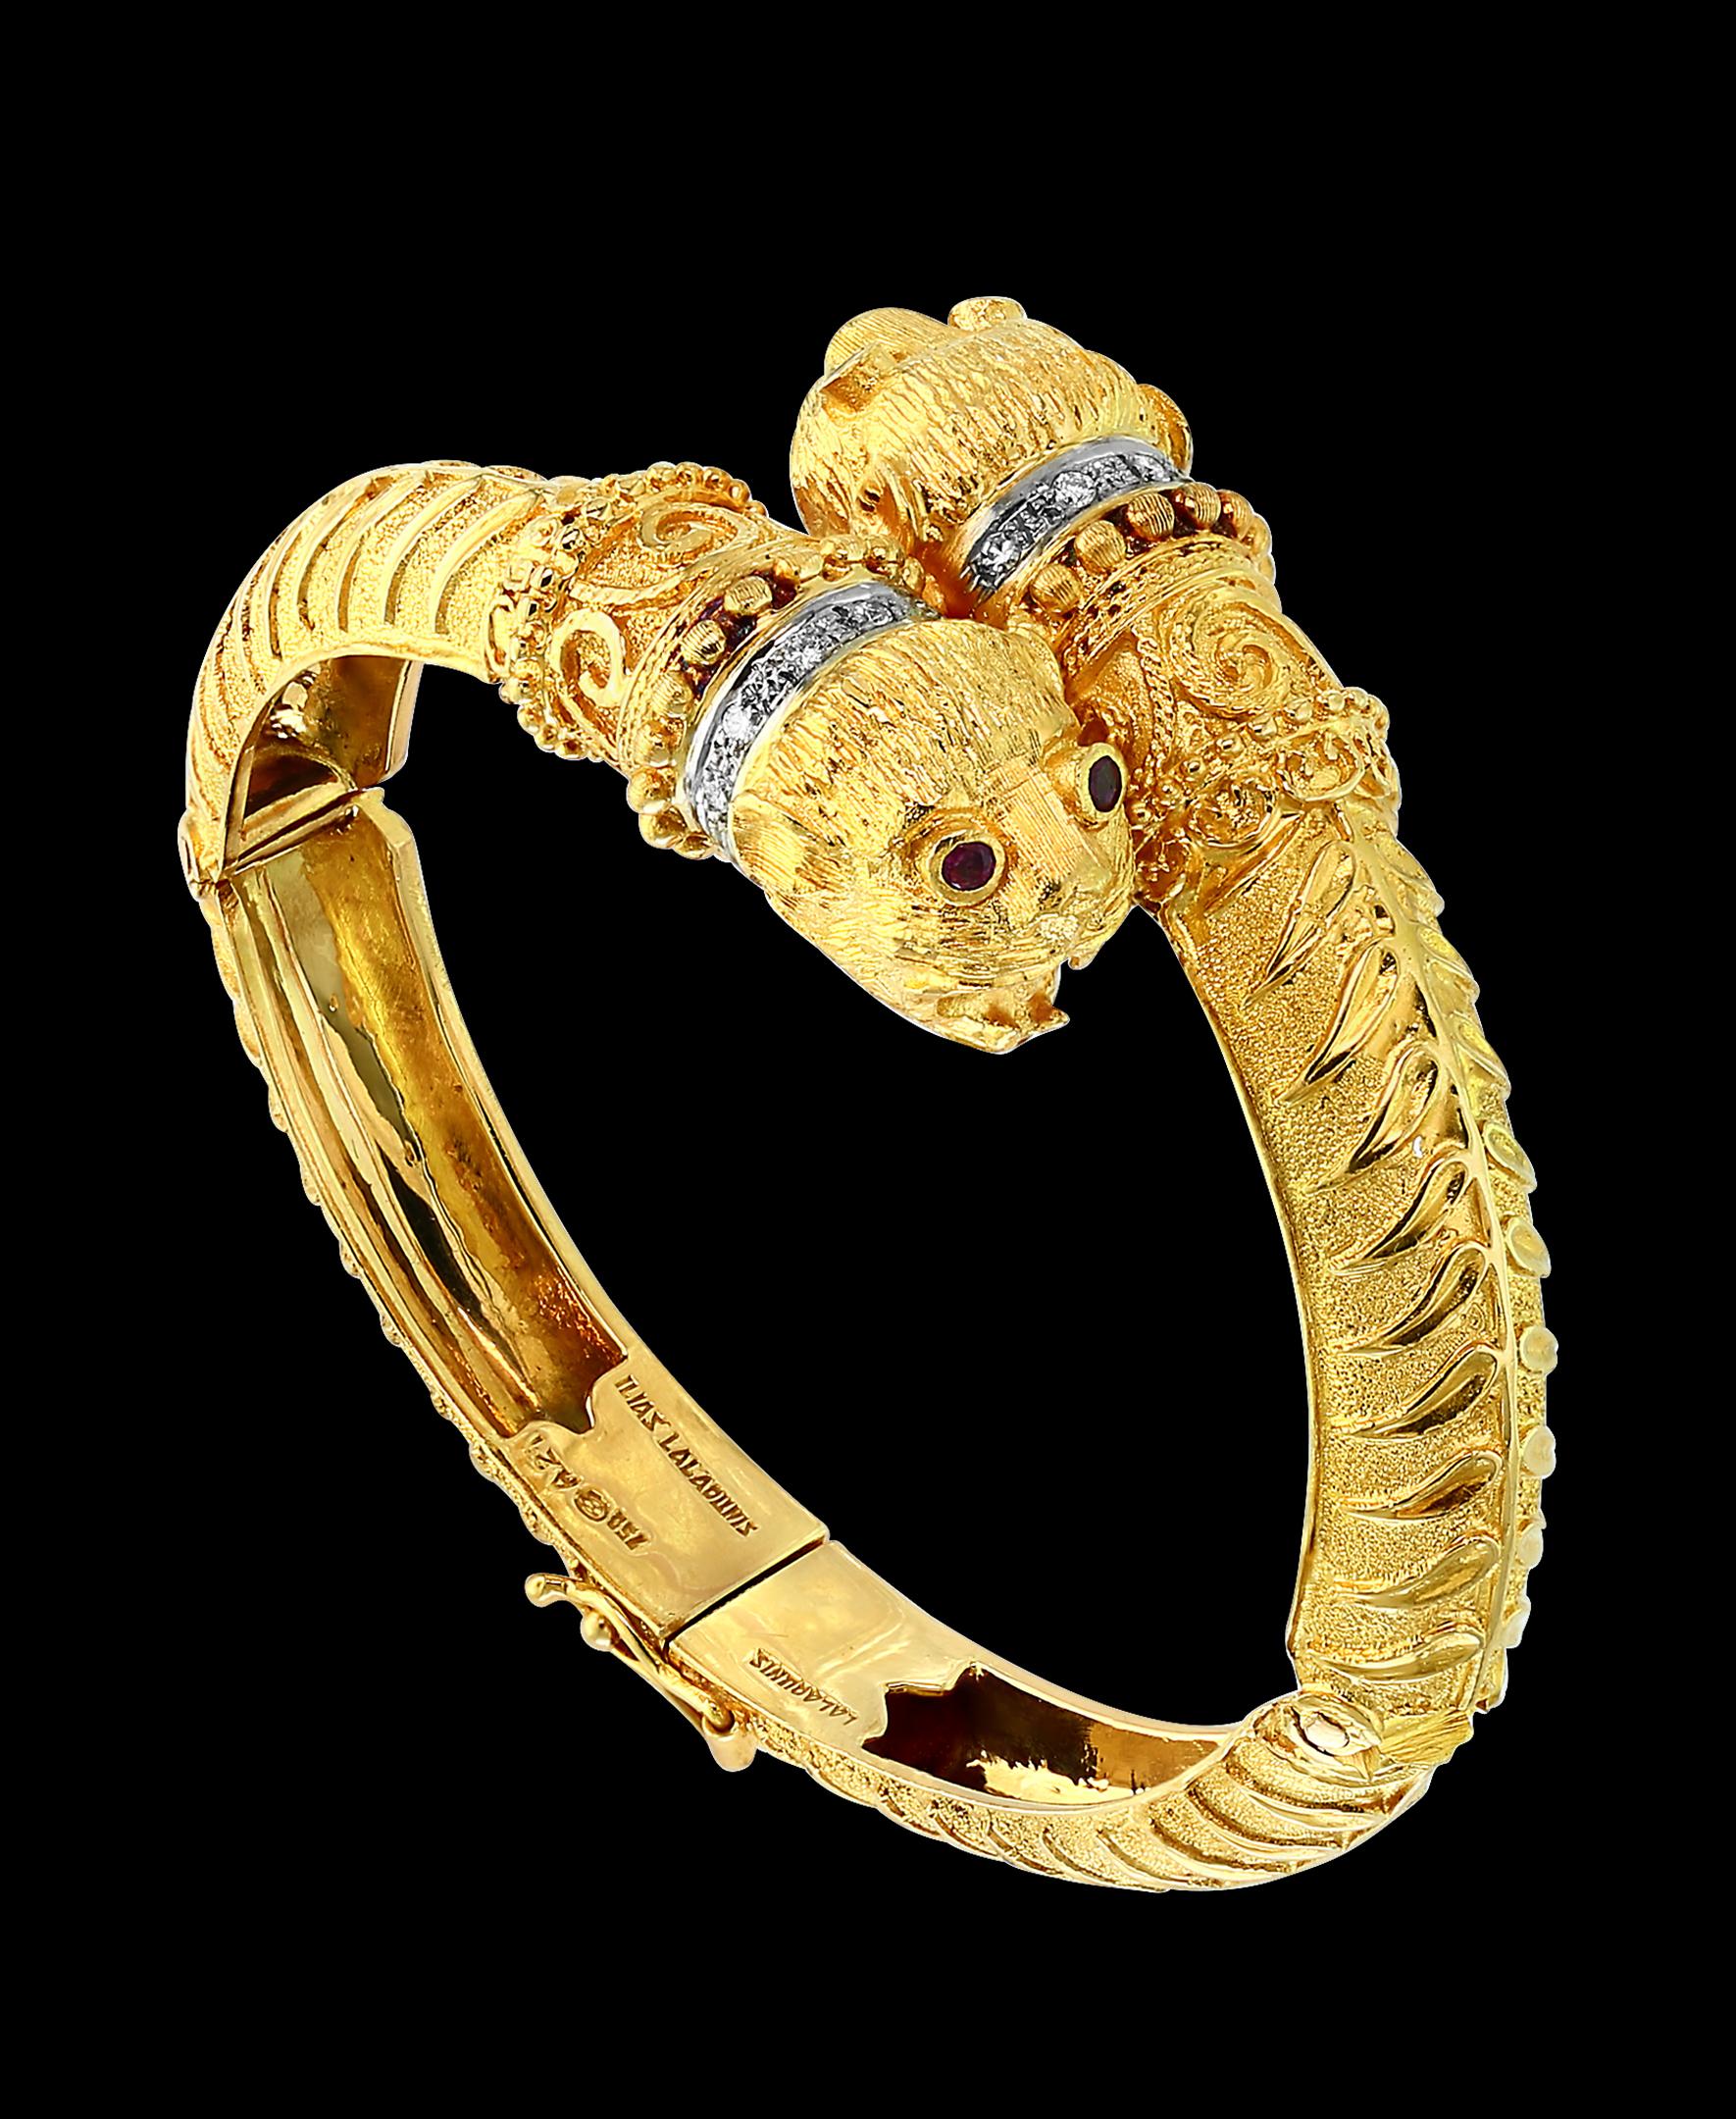 Ilias Lalaounis  Ruby & Diamond Chimera Bangle Bracelet 18 K Yellow Gold 57 Gram
It features a bangle style  Bracelet crafted from an 18  karat  Yellow gold and embedded with  Diamonds on the neck area  .
Eyes are made of brilliant Ruby.
Open from